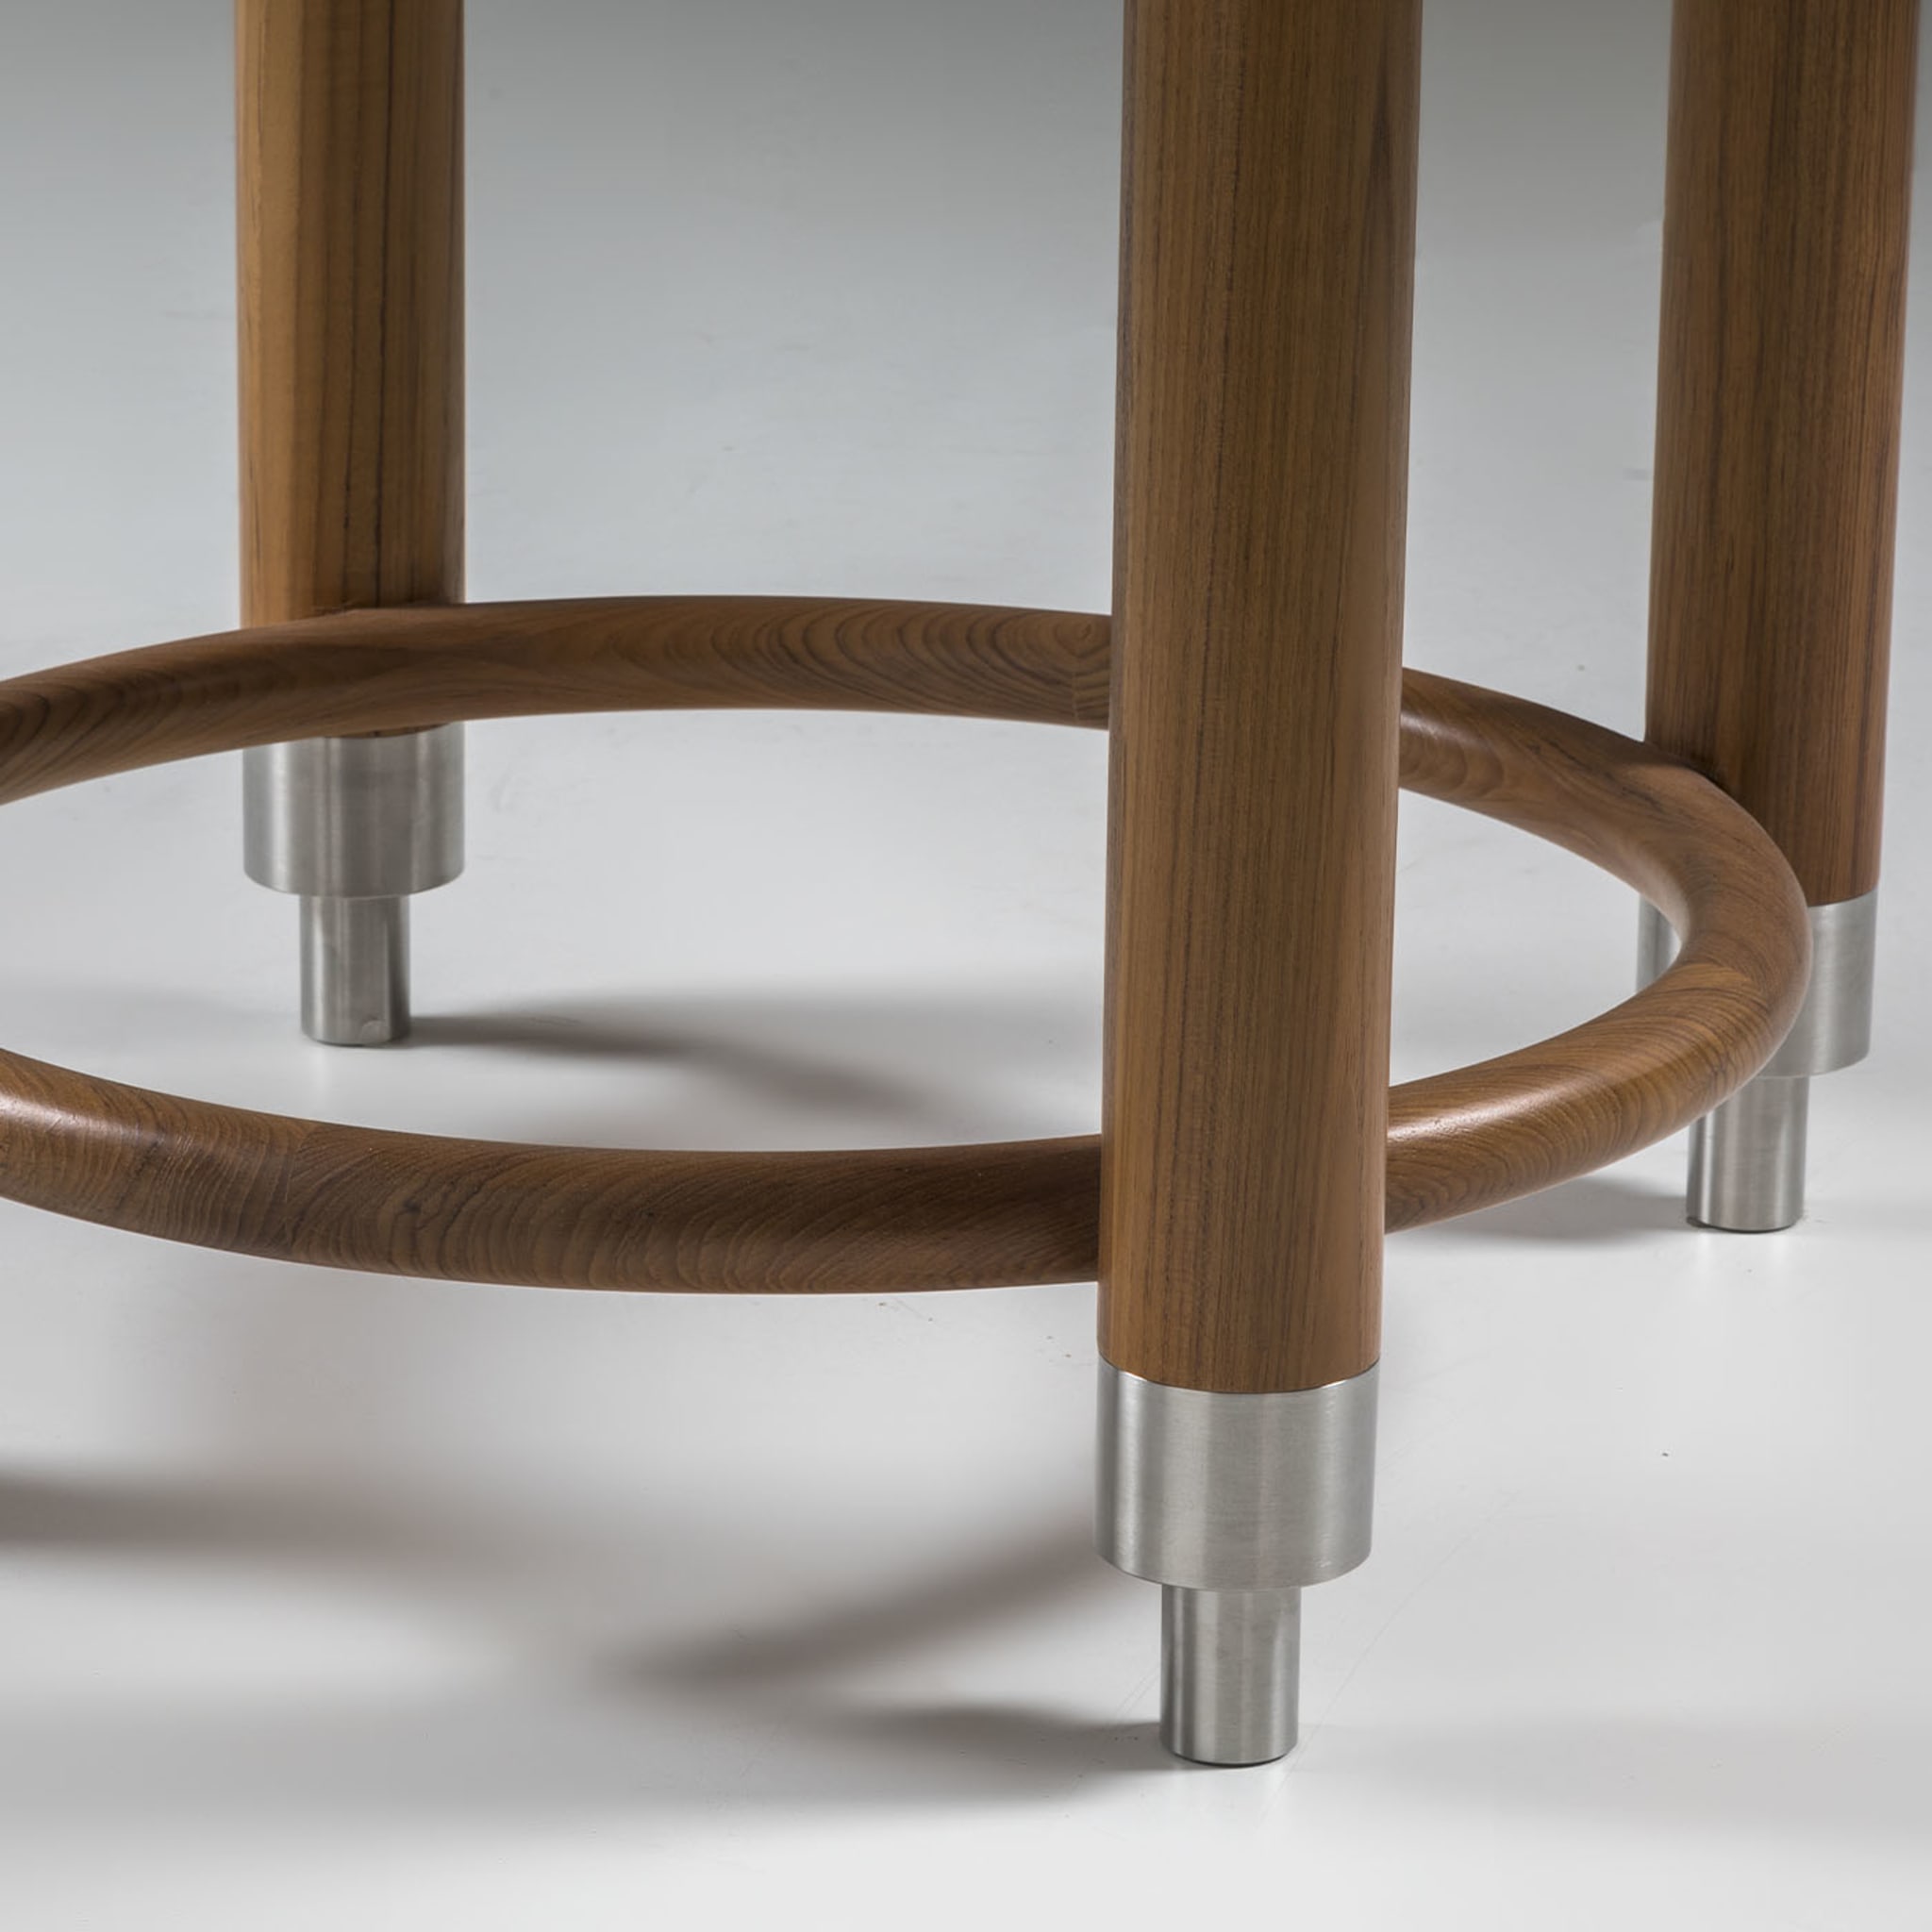 Timo Round Outdoor Table - Alternative view 1